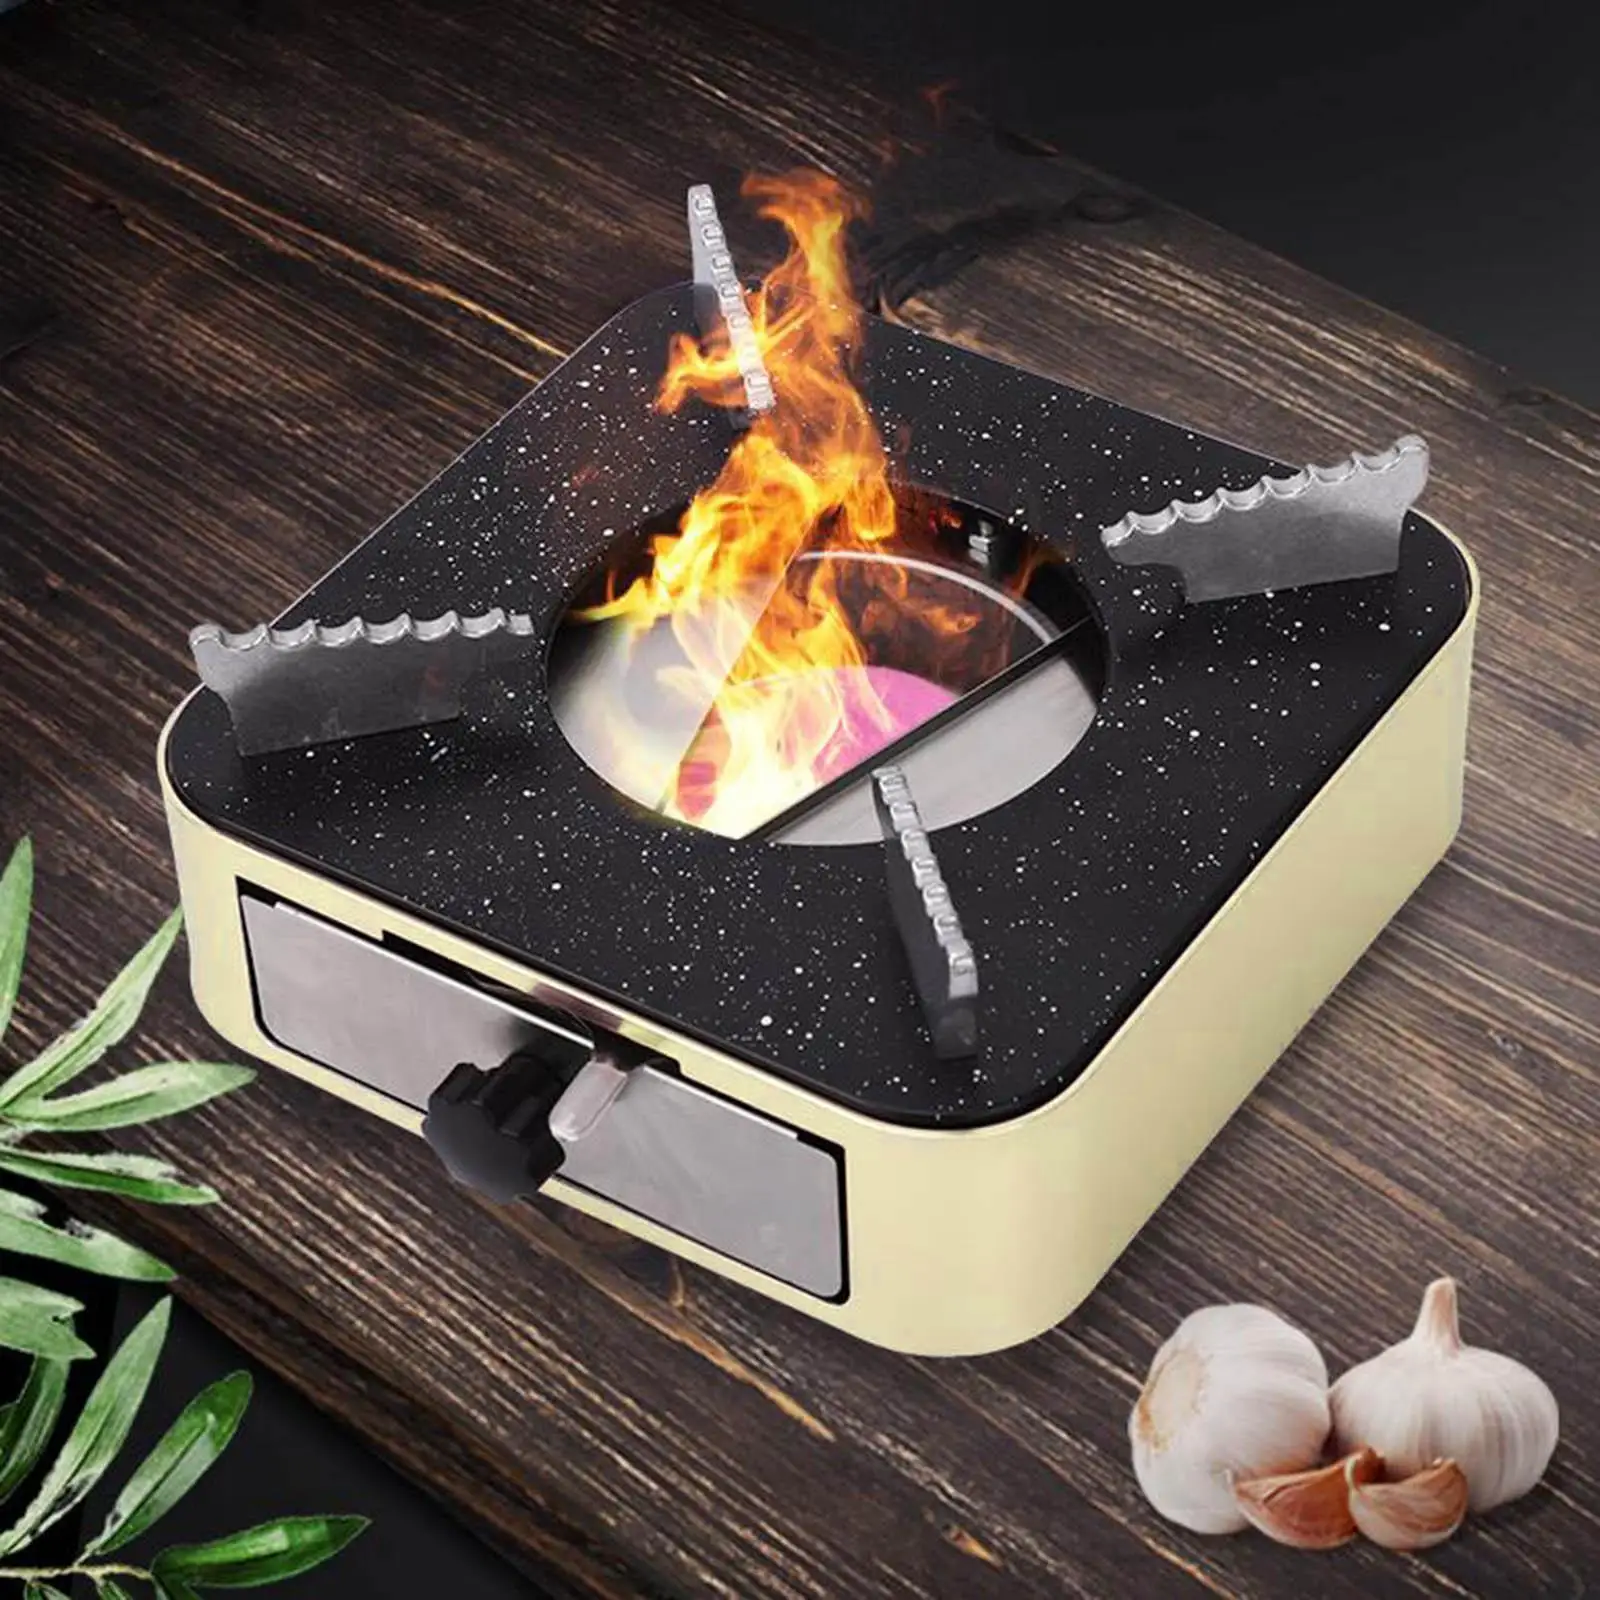  Stove Lightweight Furnace for Outdoor Camping Household Backpacking